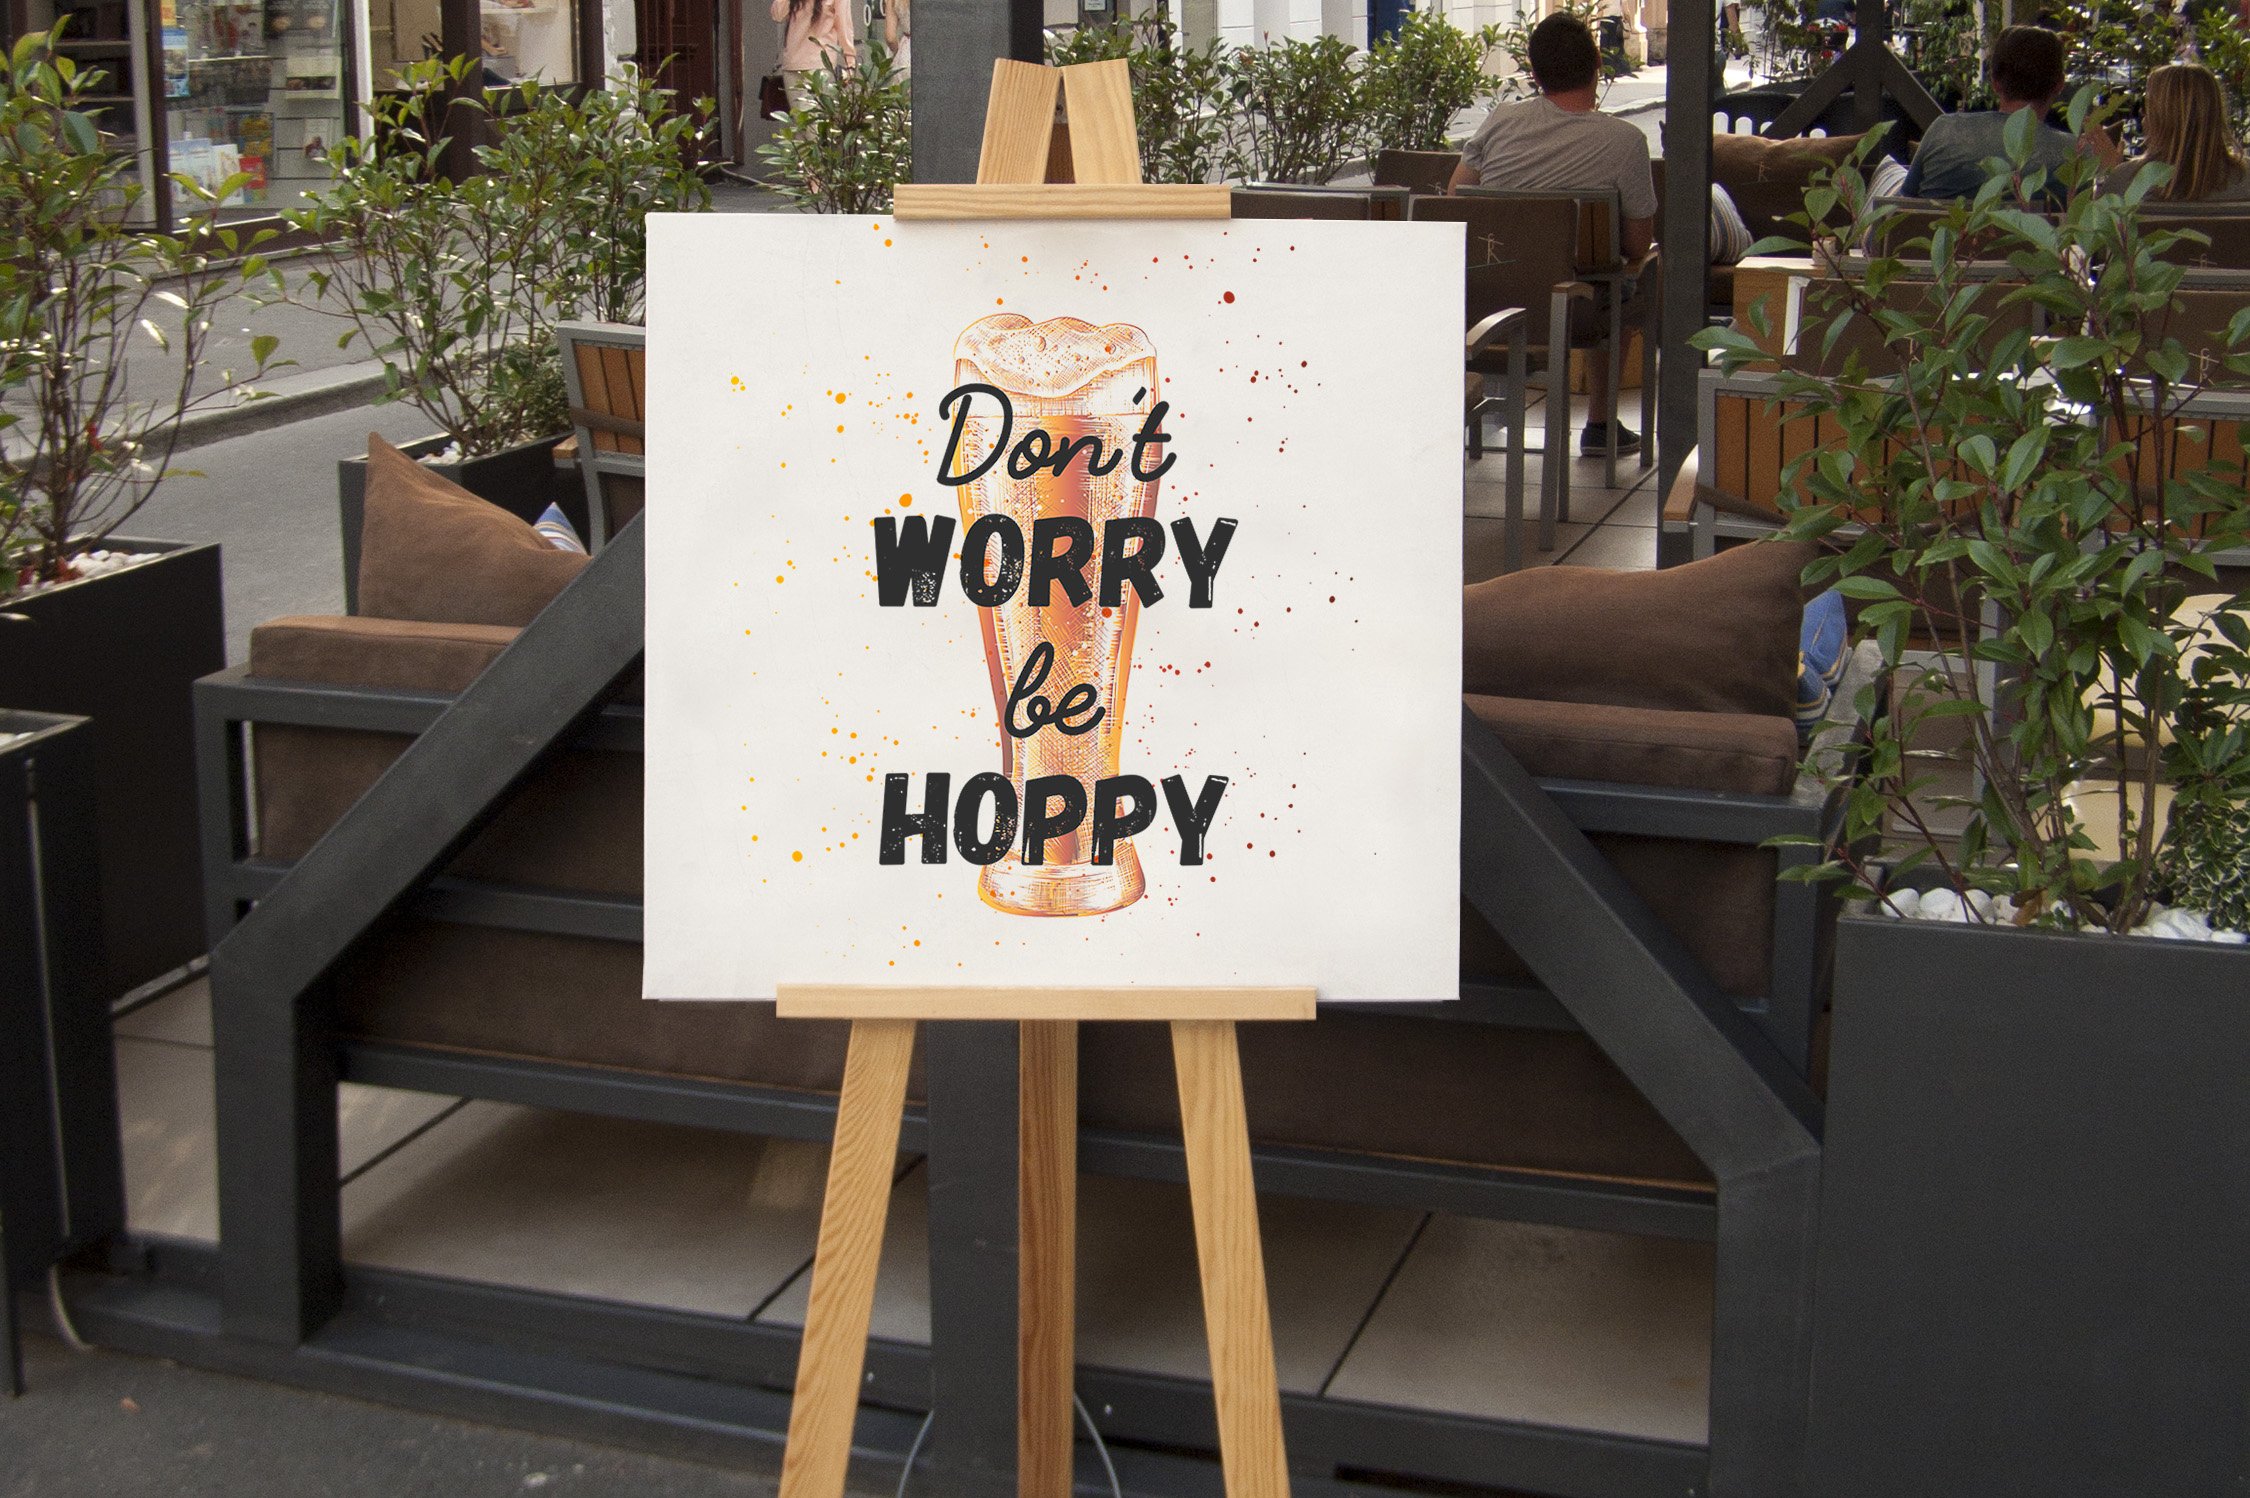 A sign on a easel that says don't worry be hoppy.